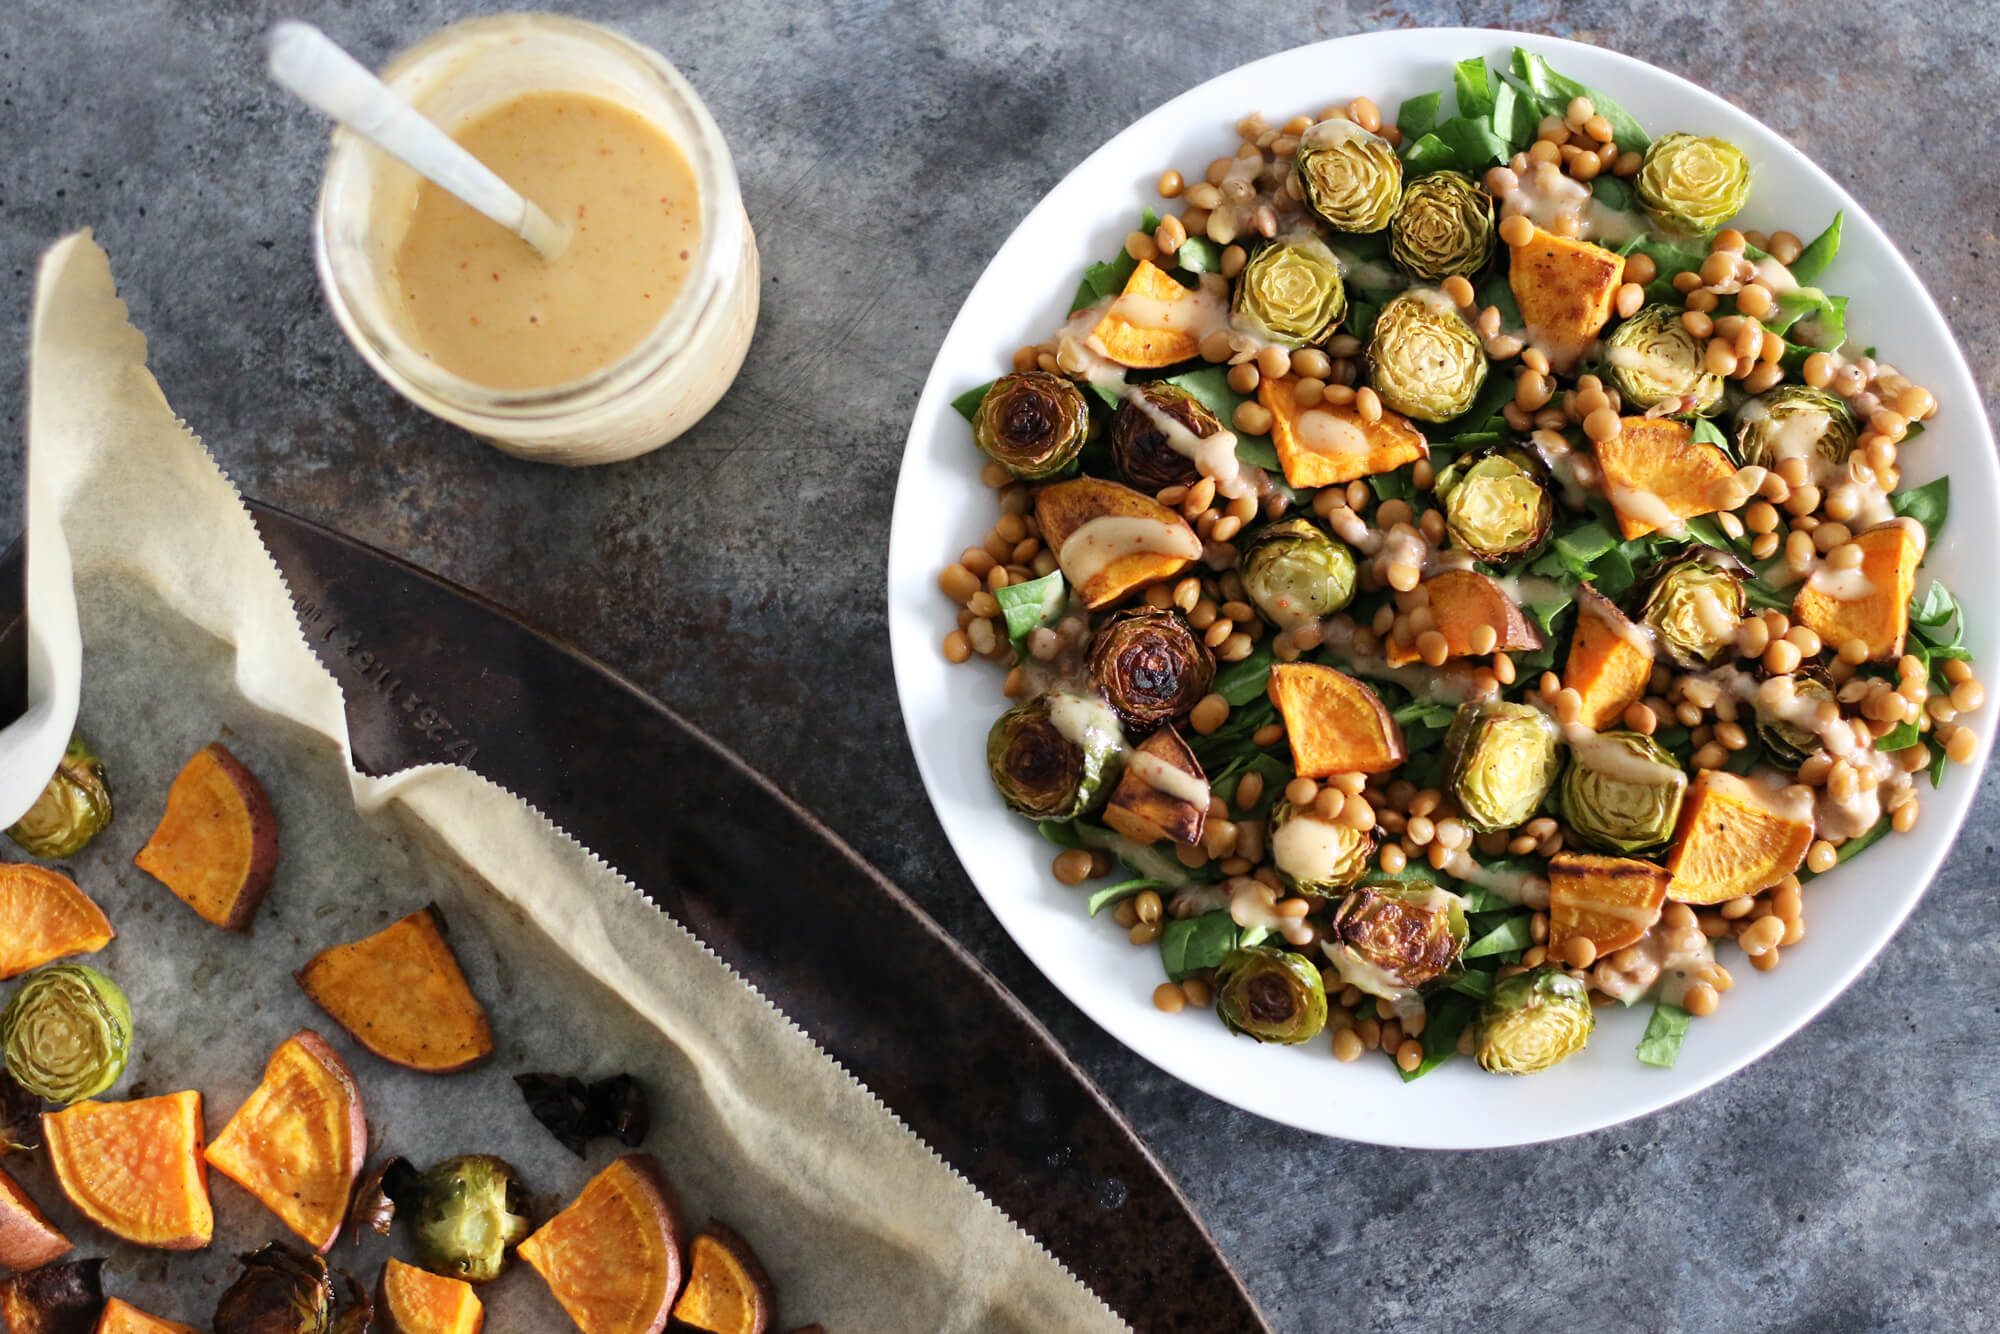 20 Healthy Fall & Thanksgiving Meal Ideas Your Clients Will Love: Roasted Sweet Potato & Brussels Sprouts Salad